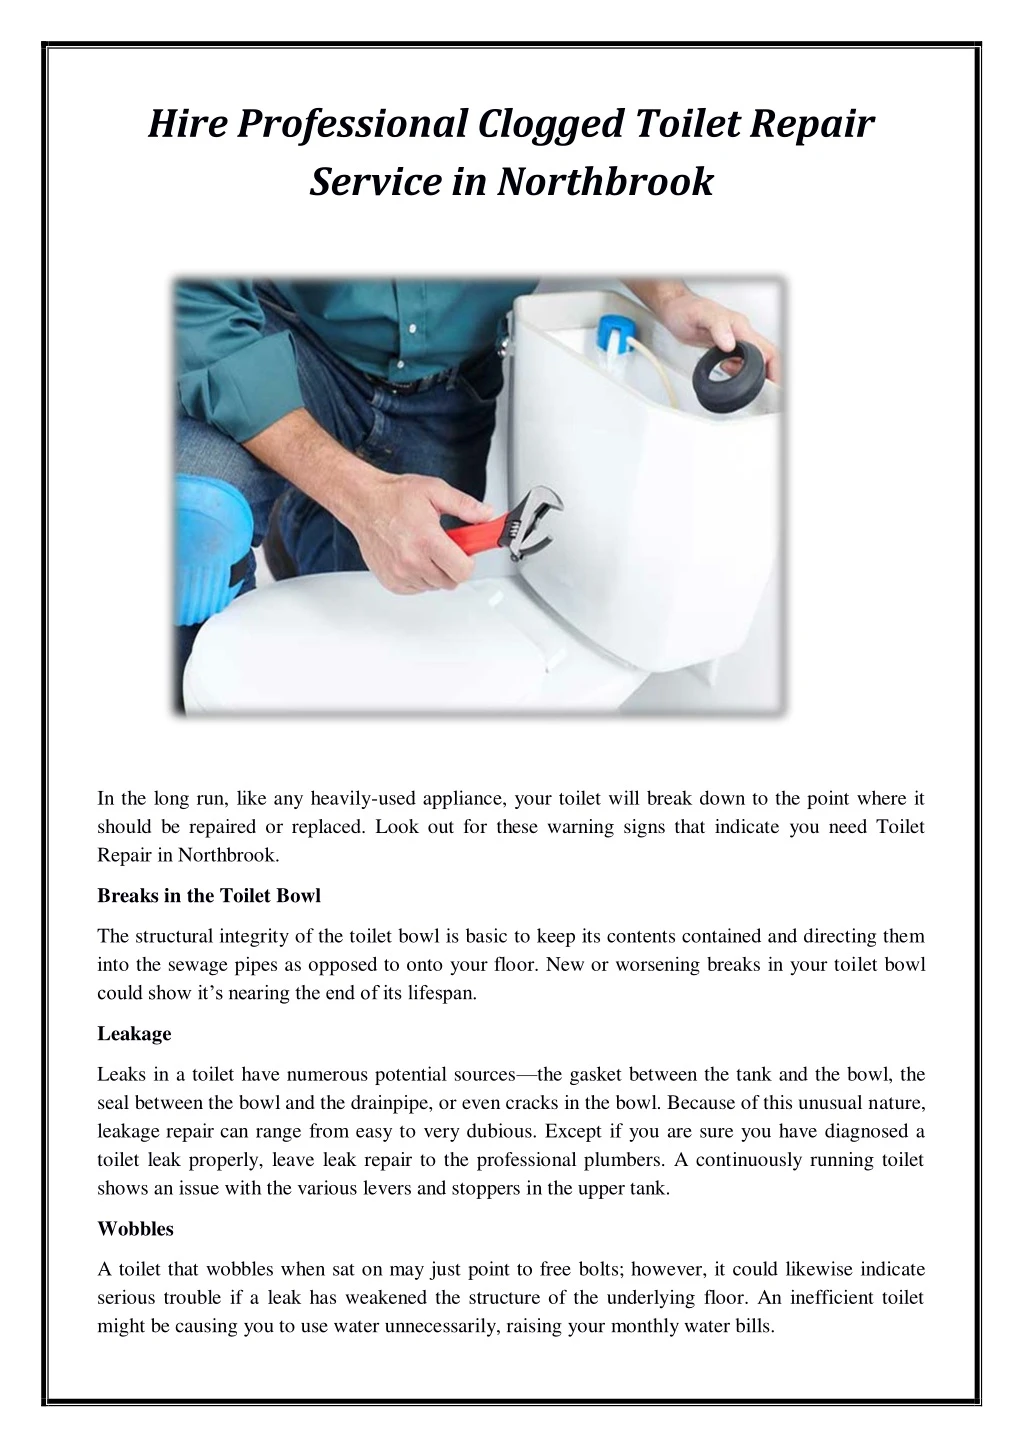 hire professional clogged toilet repair service